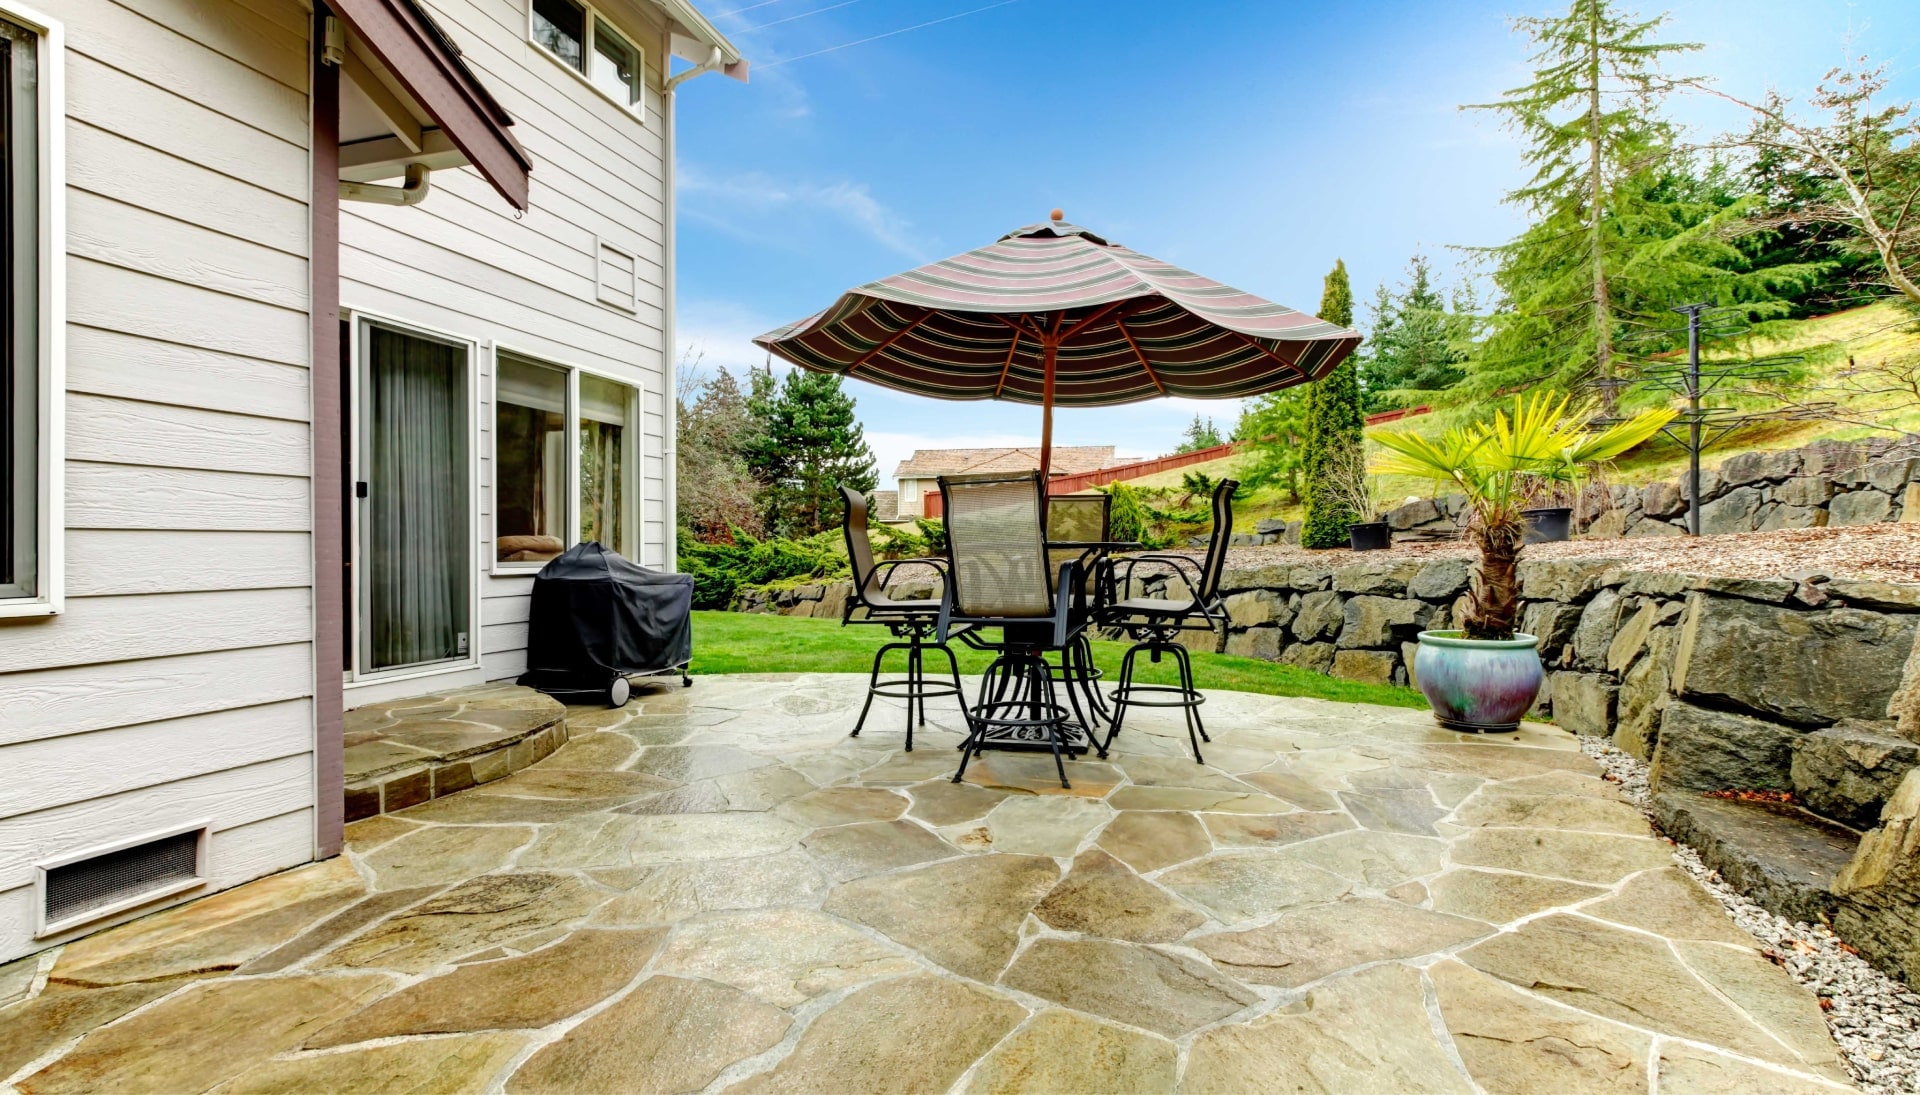 Create an Outdoor Oasis with Stunning Concrete Patio in Orange County, CA - Enjoy Beautifully Textured and Patterned Concrete Surfaces for Your Entertaining and Relaxation Needs.